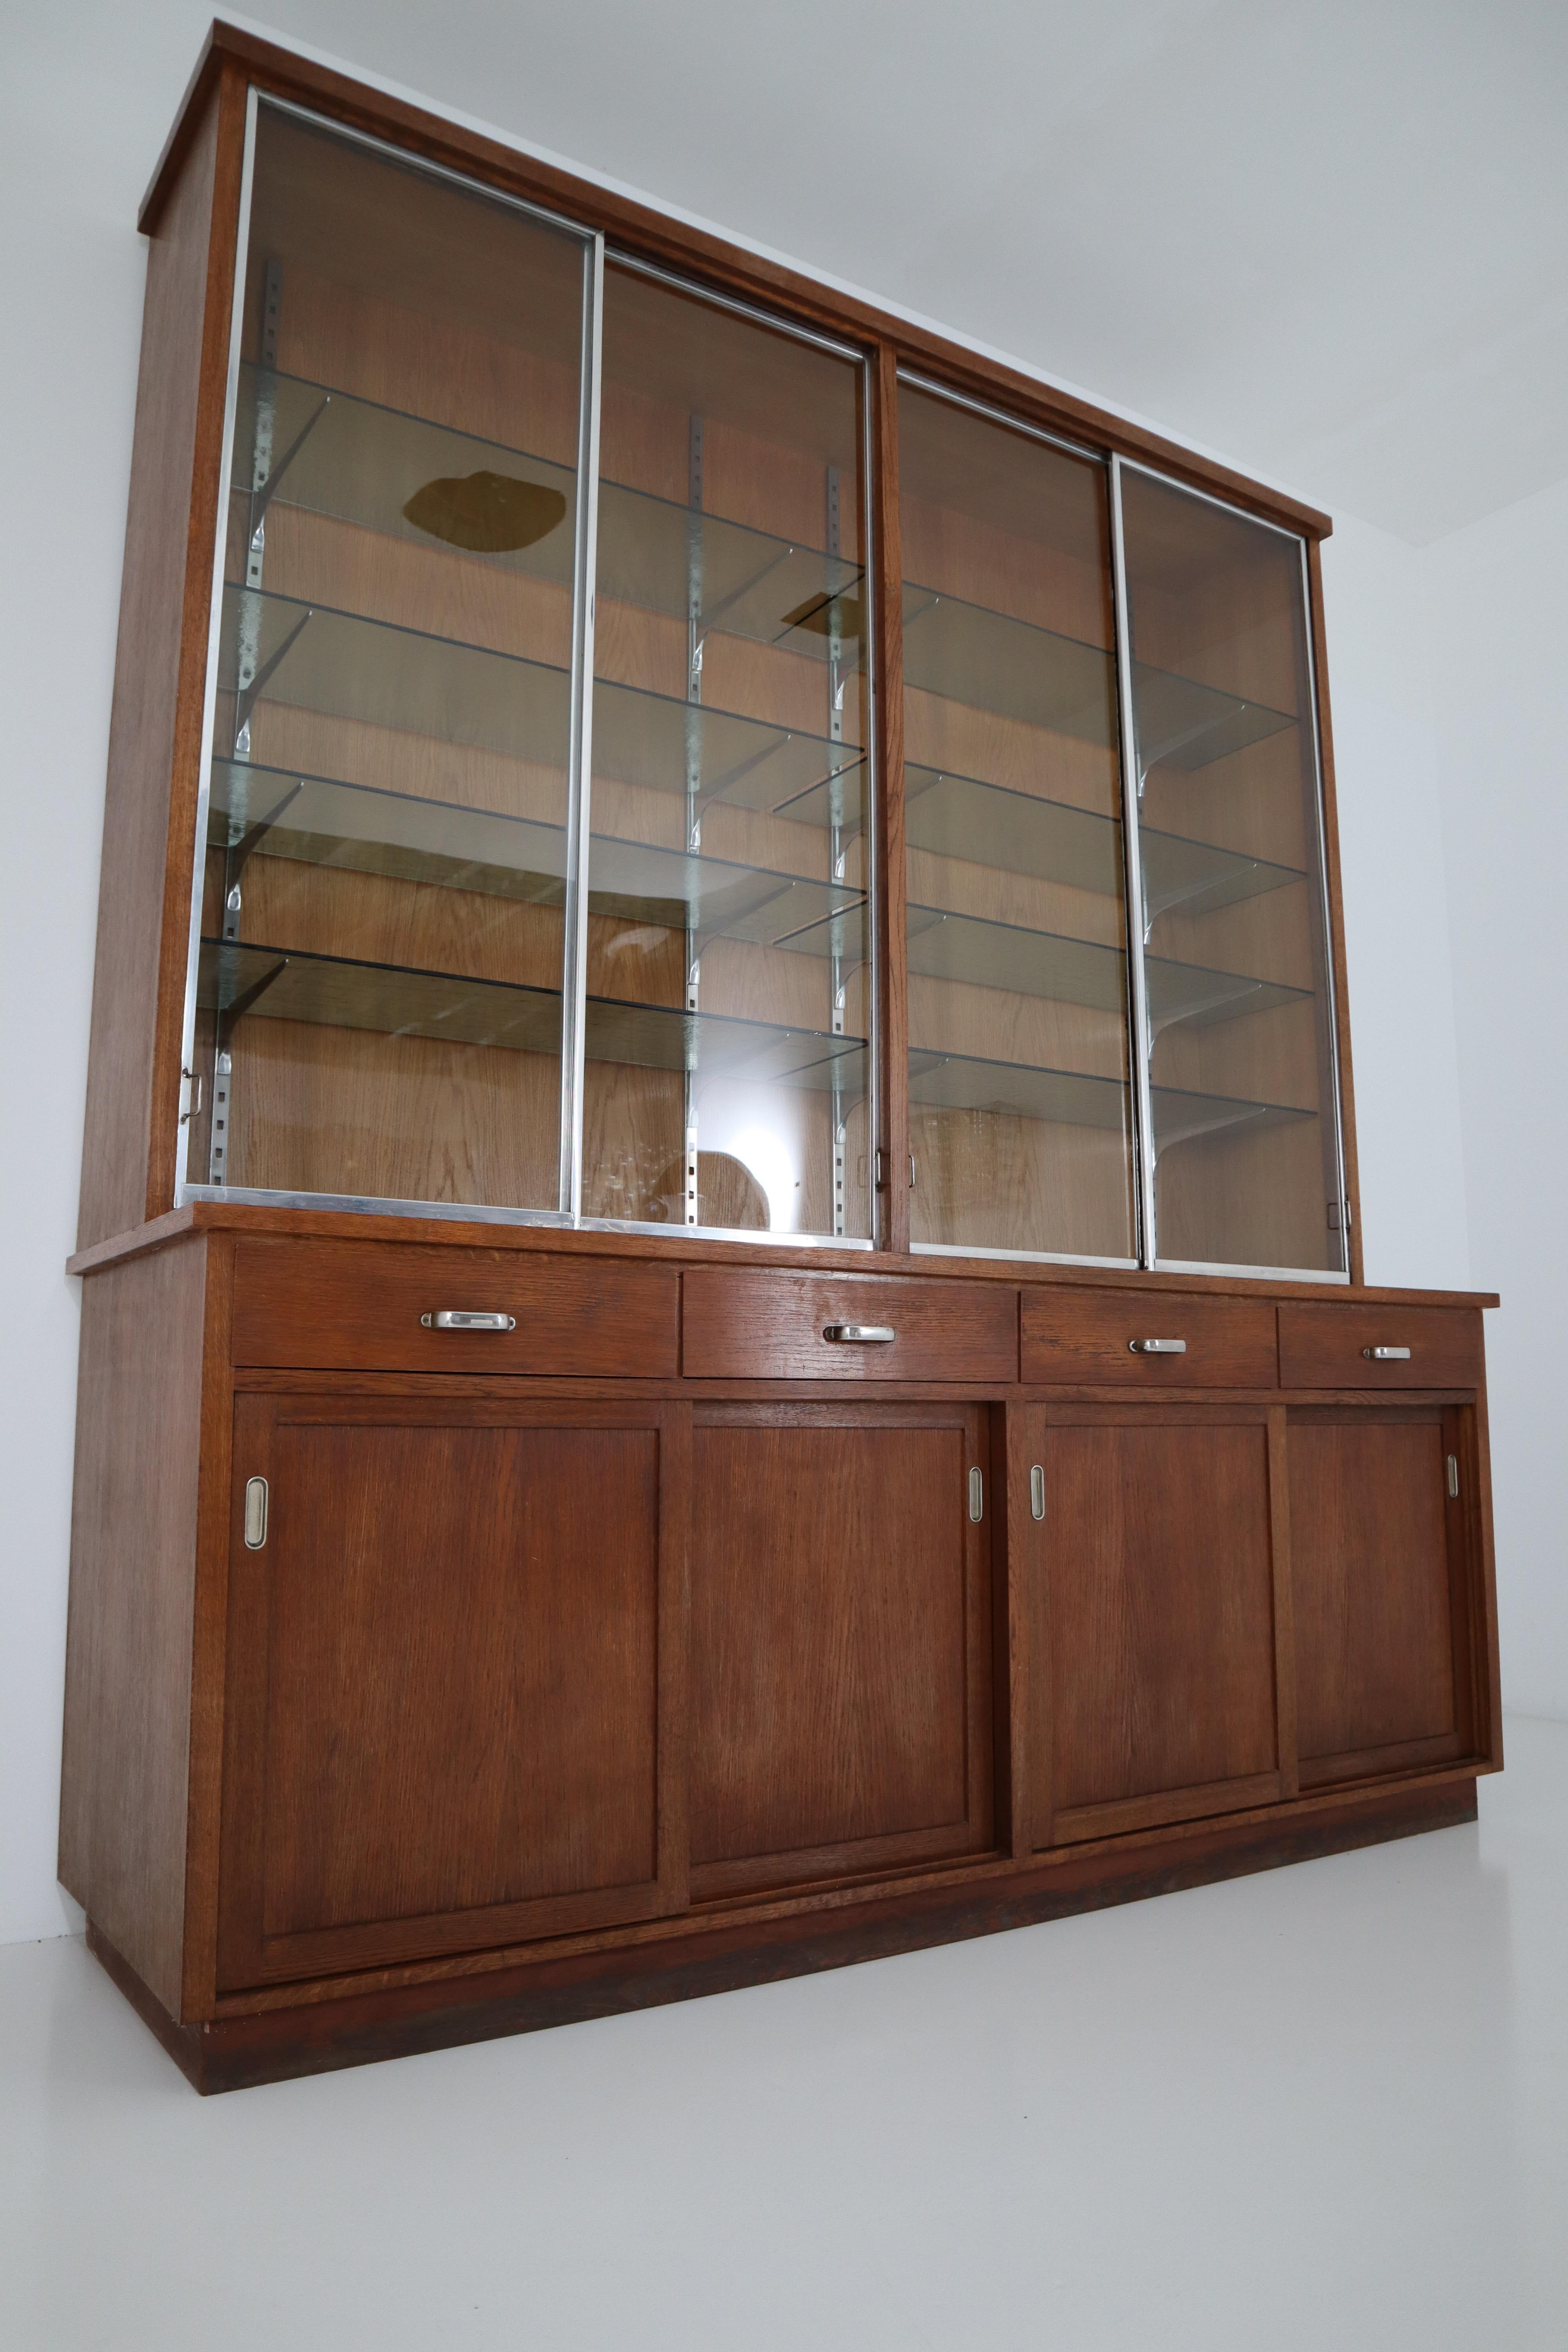 Ernst Rockhausen Bauhaus Style Plywood and Oak Display Cabinet, Germany, 1920s For Sale 9